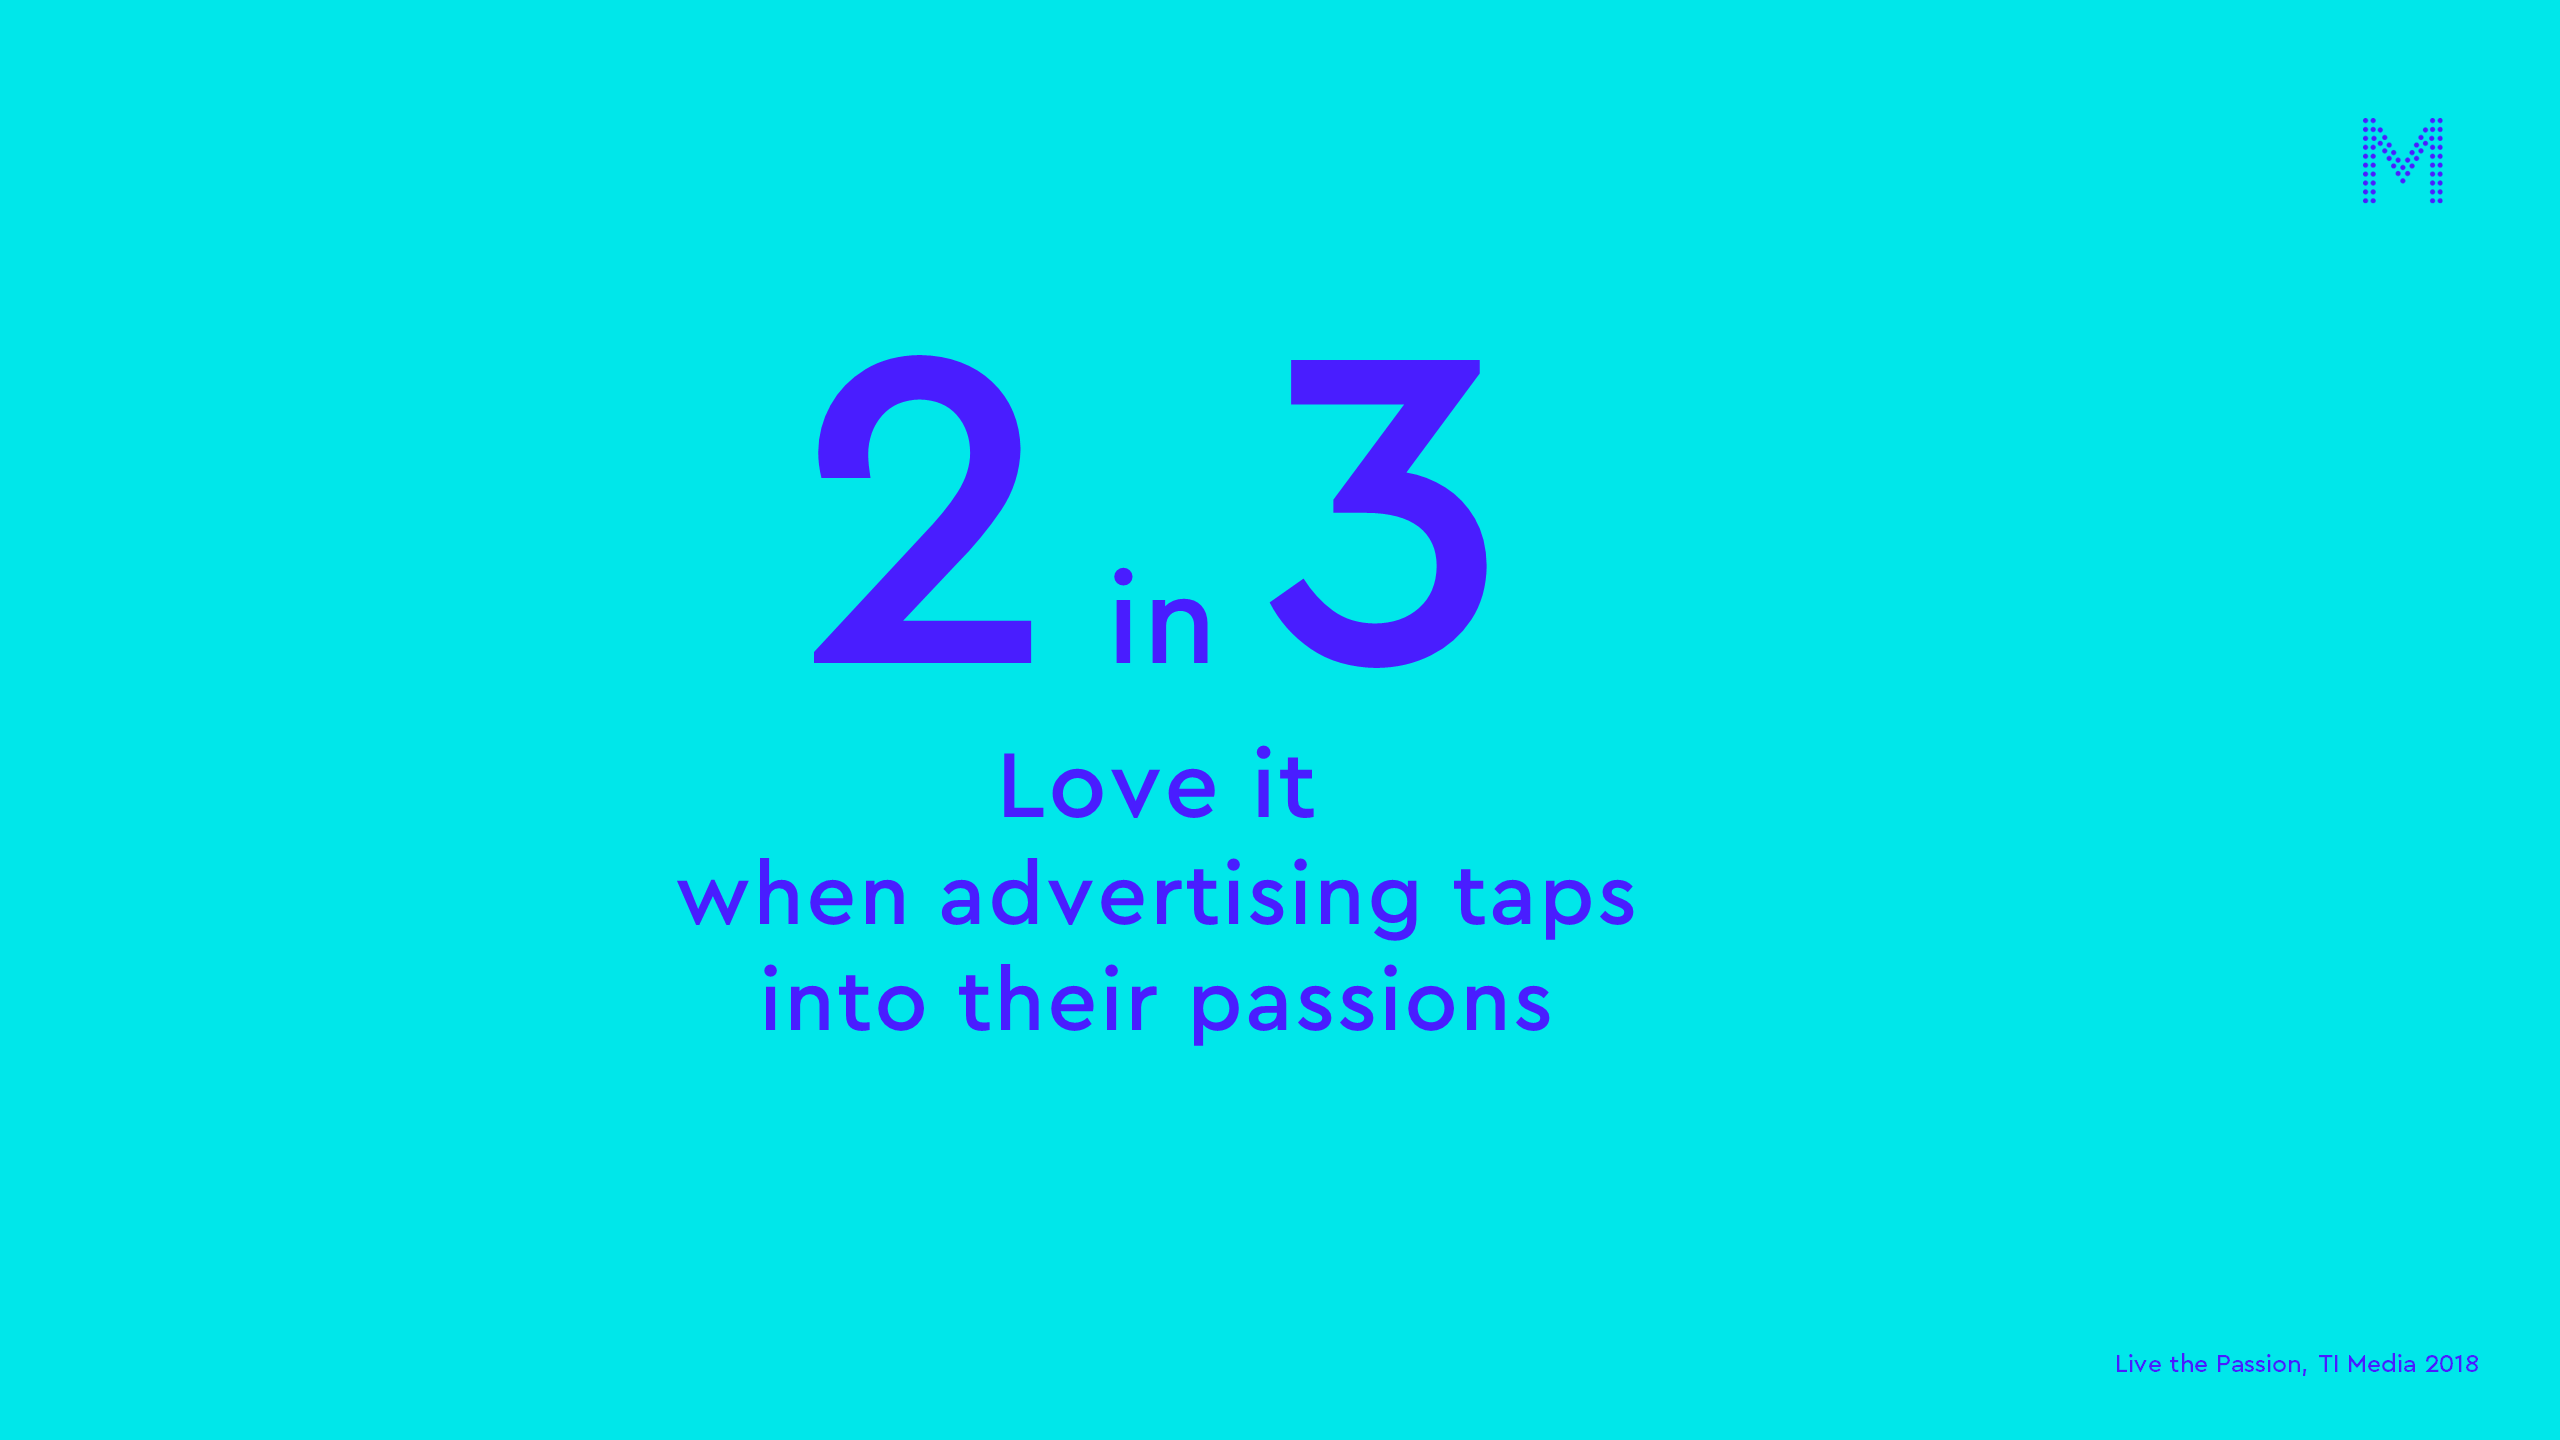 2 in 3 Love it when advertising taps into their passions